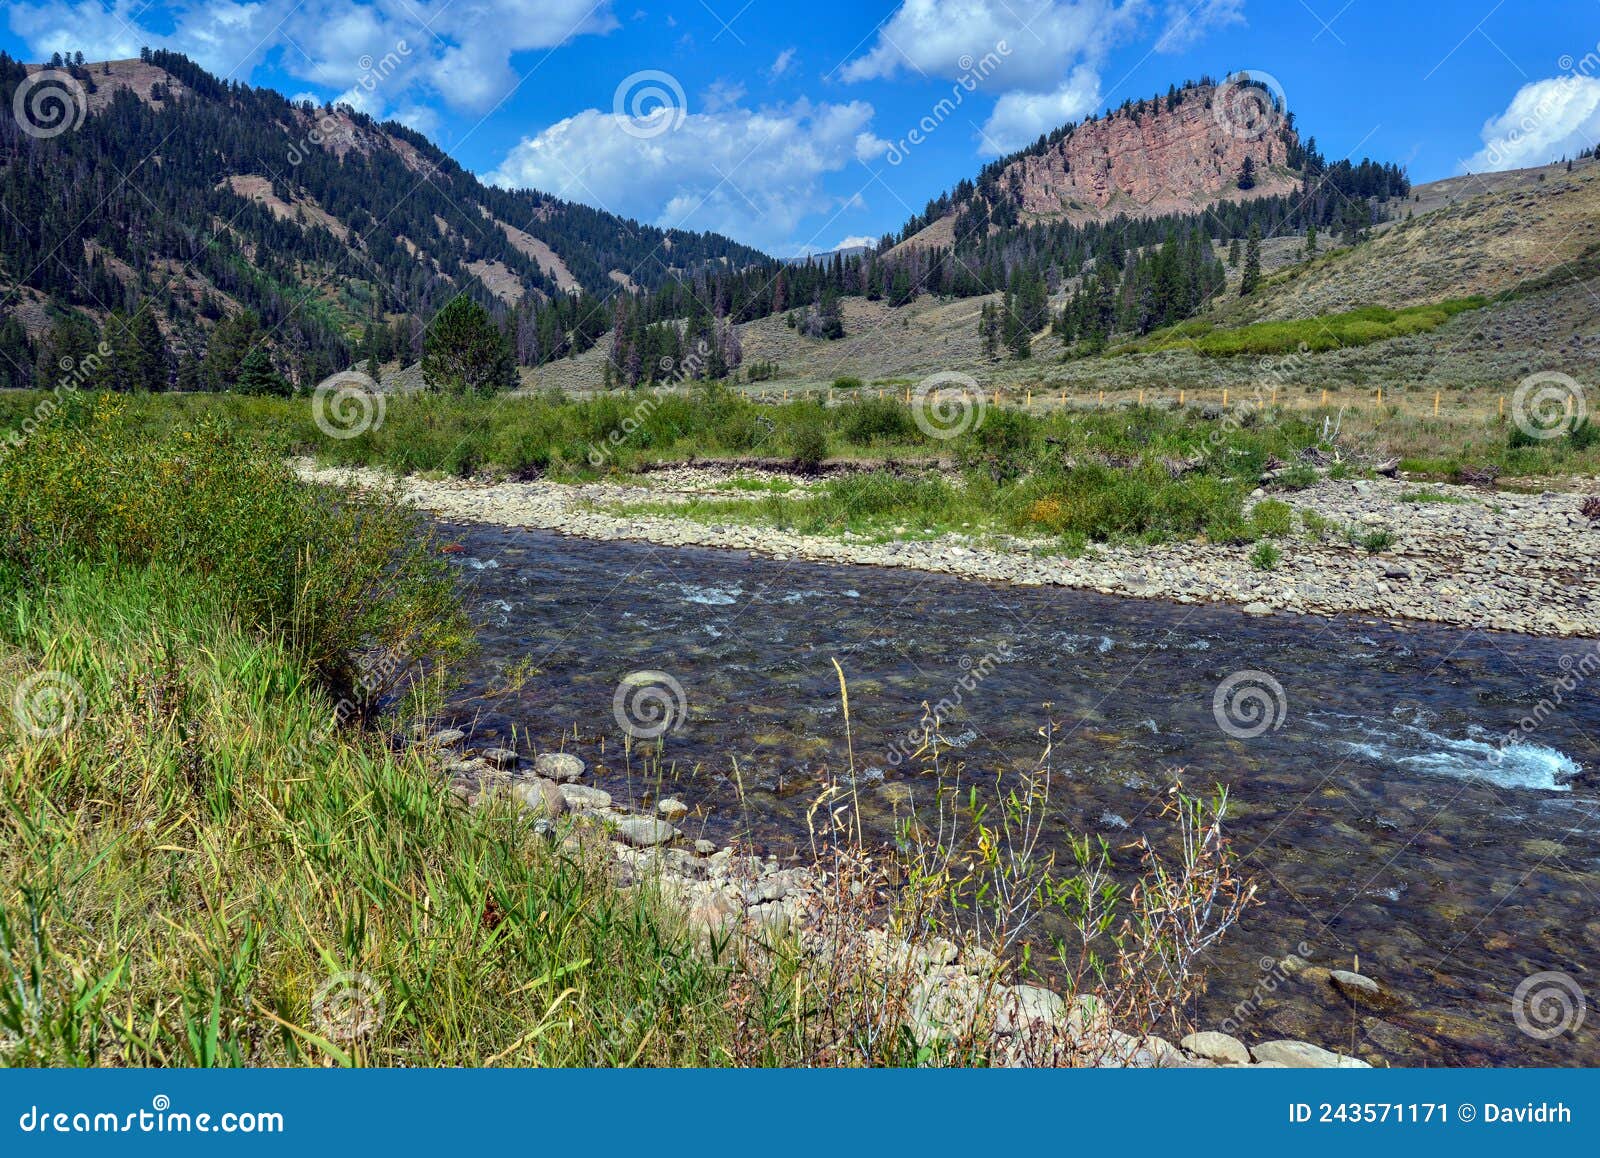 the hoback river flows through the kozy campground in the bridger-teton national forest, wyoming, usa